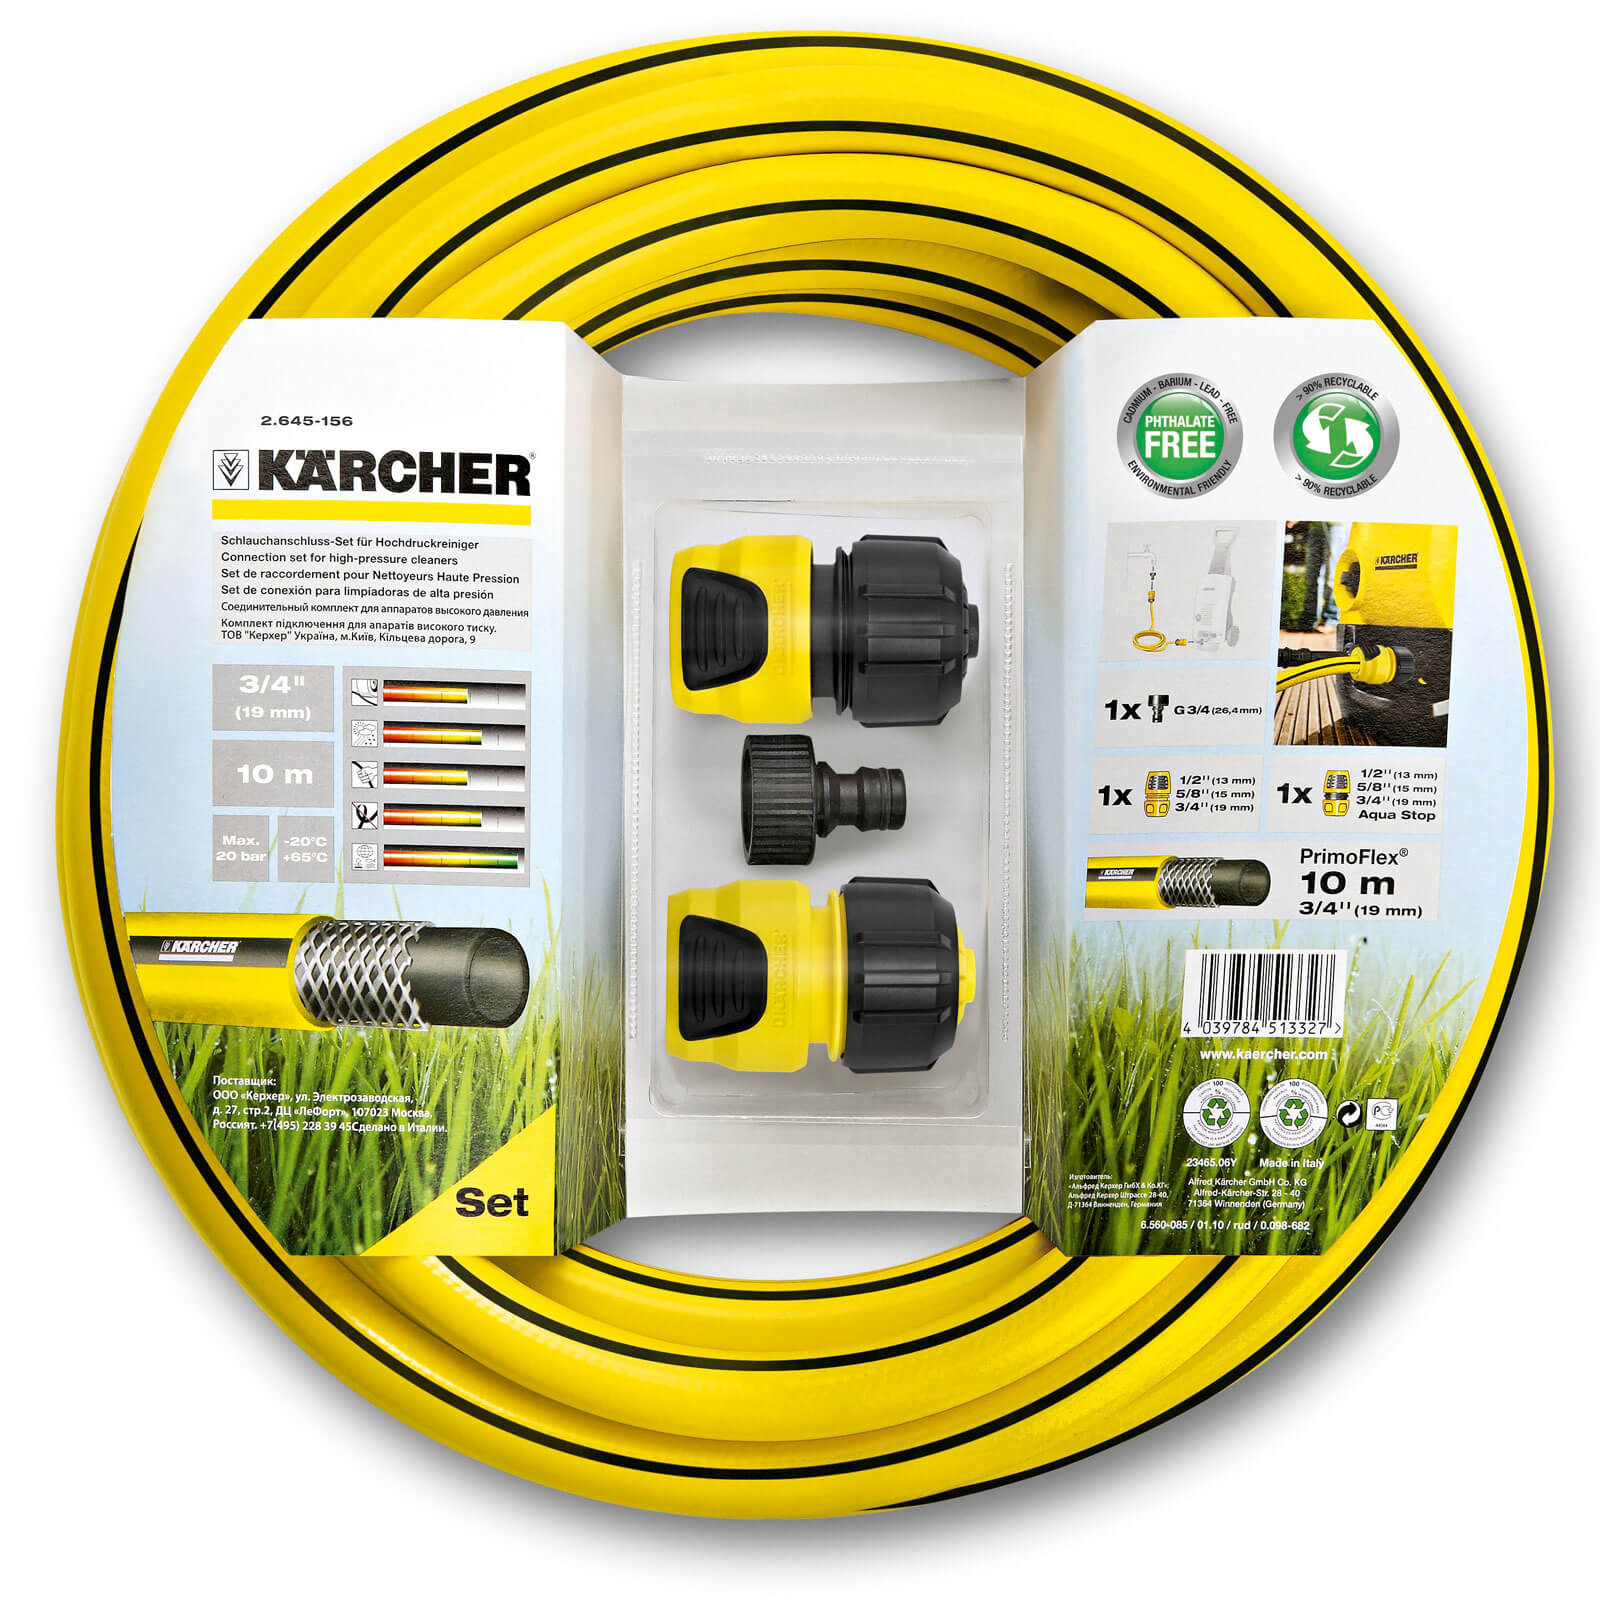 Image of Karcher Pressure Washer Hose Connection Kit 3/4" / 19mm 10m Yellow & Black